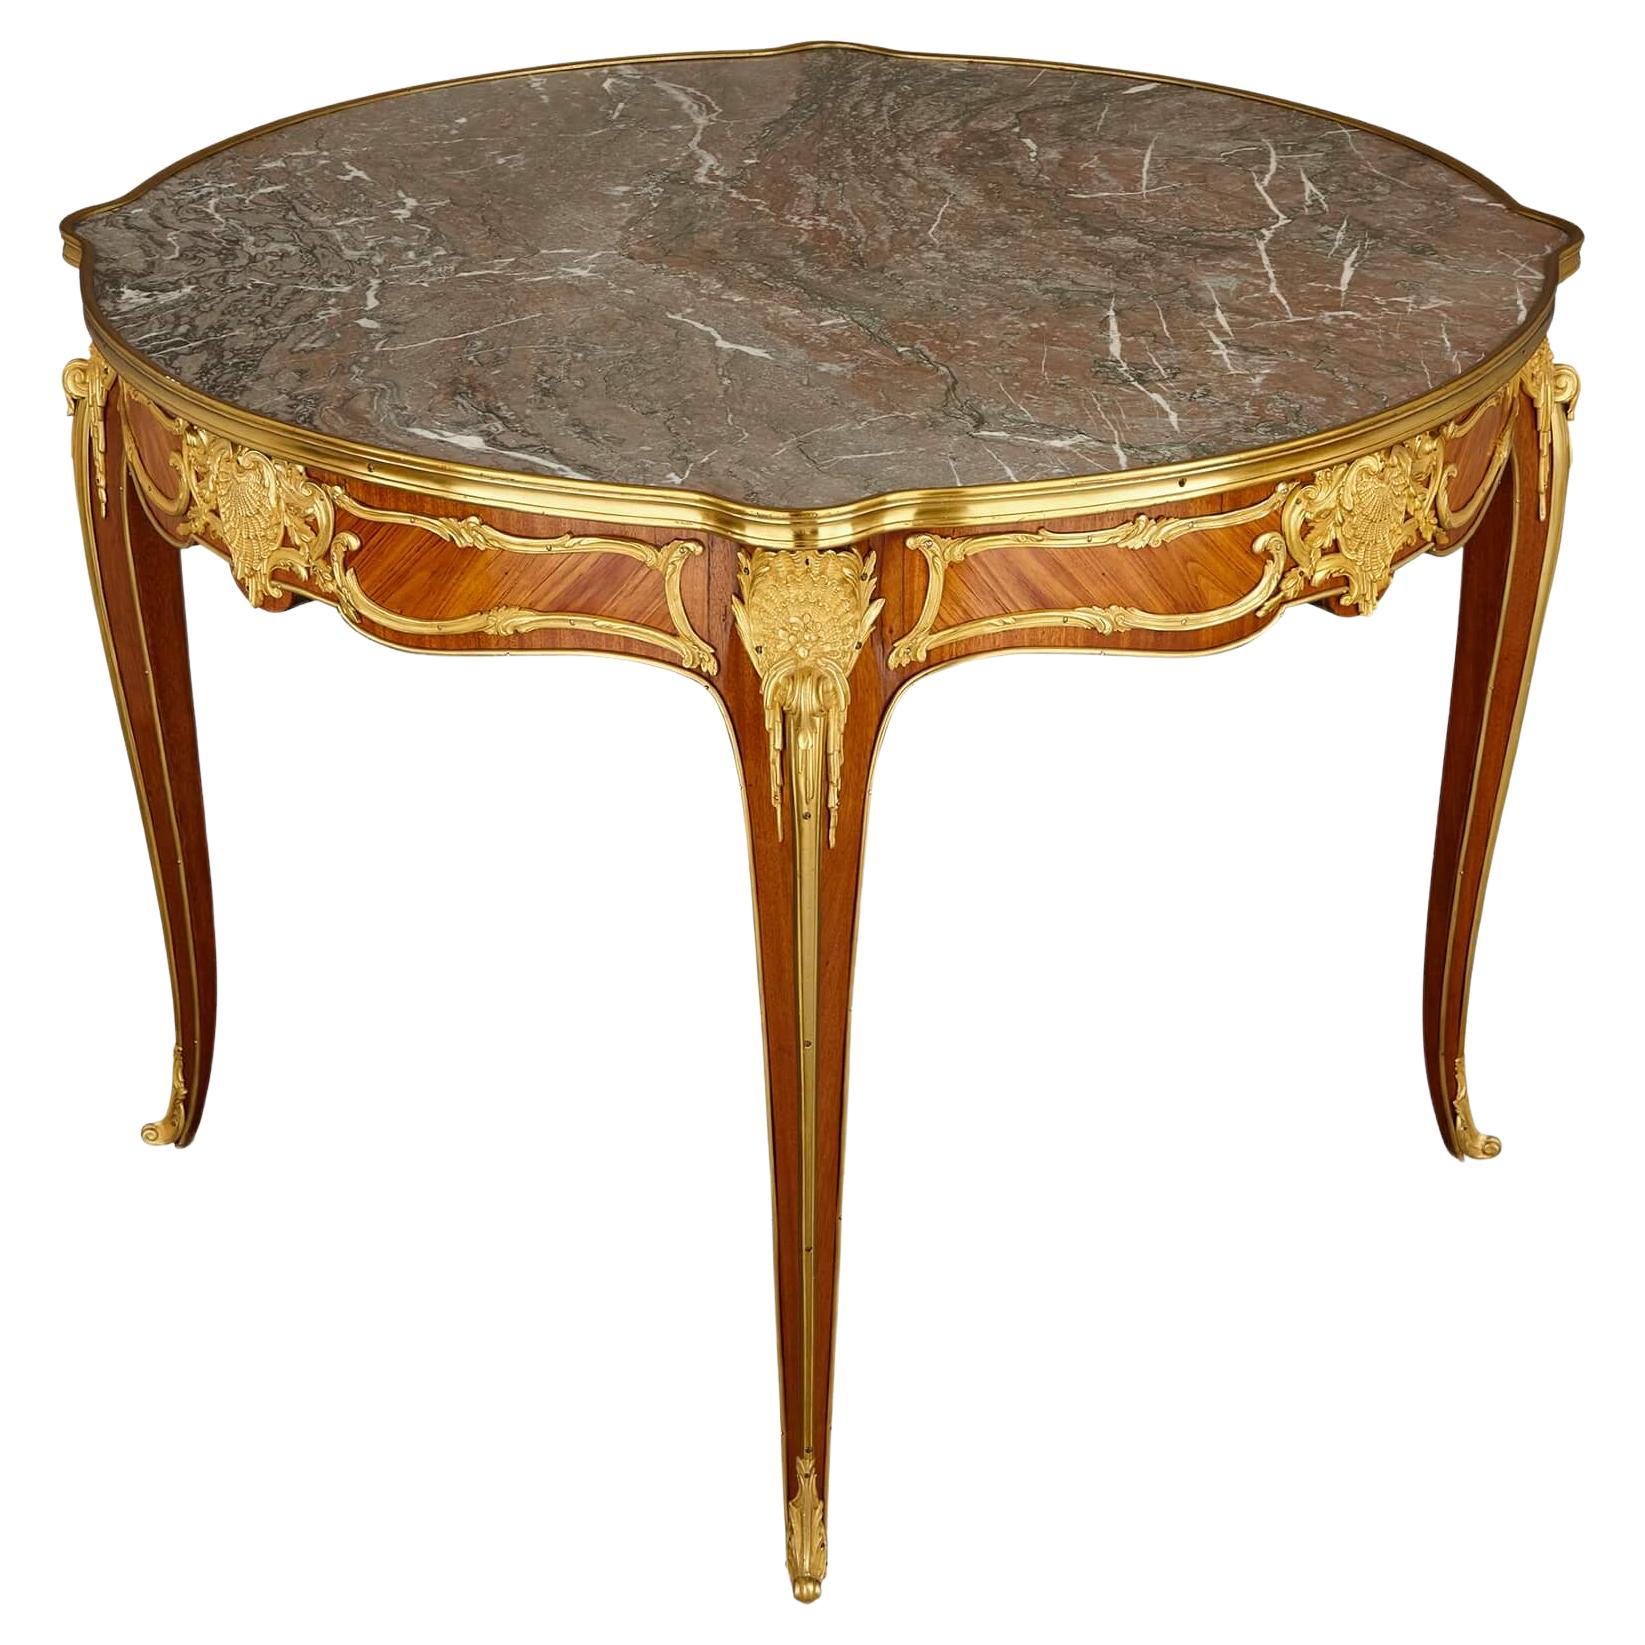 Antique Rococo Style Rosewood, Ormolu and Marble Centre Table